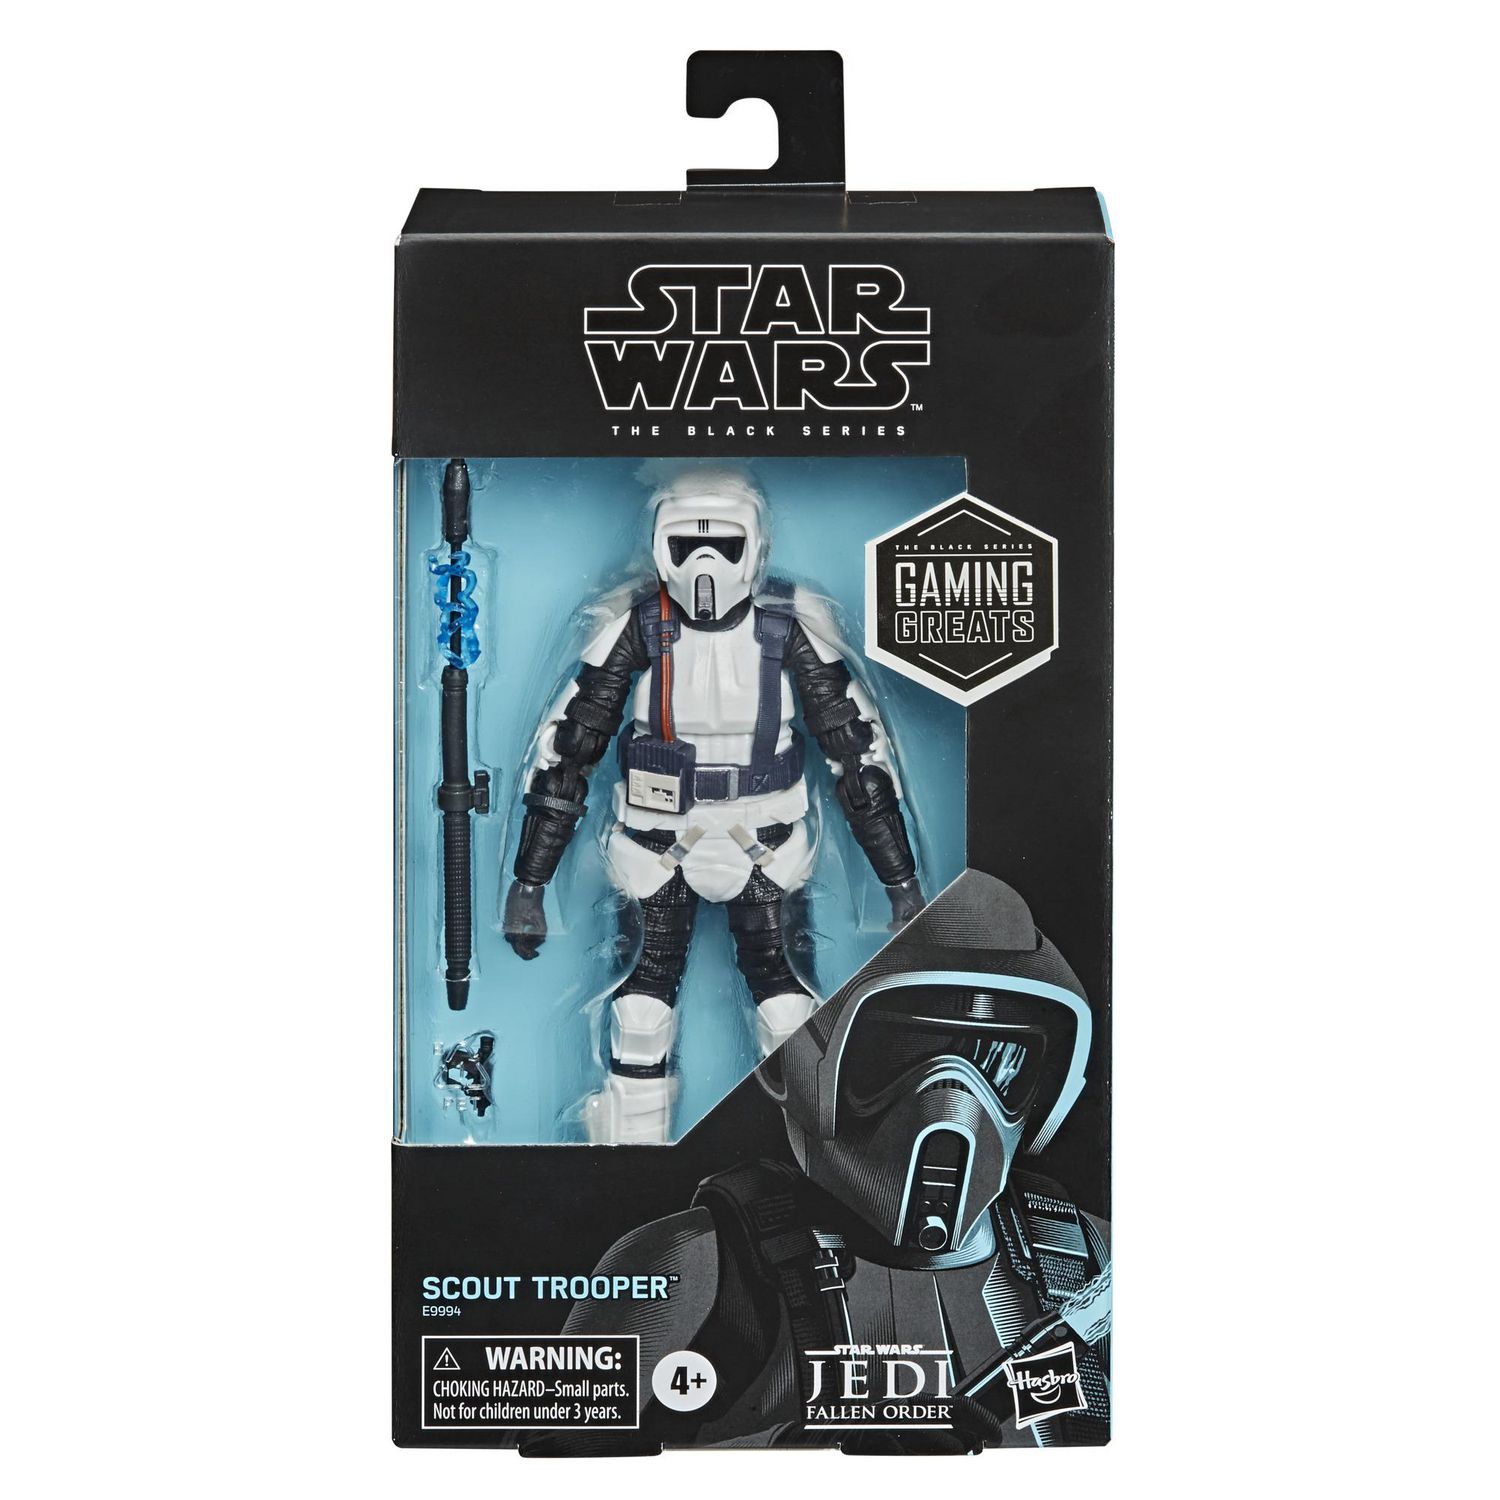 Star Wars The Black Series Gaming Greats Scout Trooper Toy